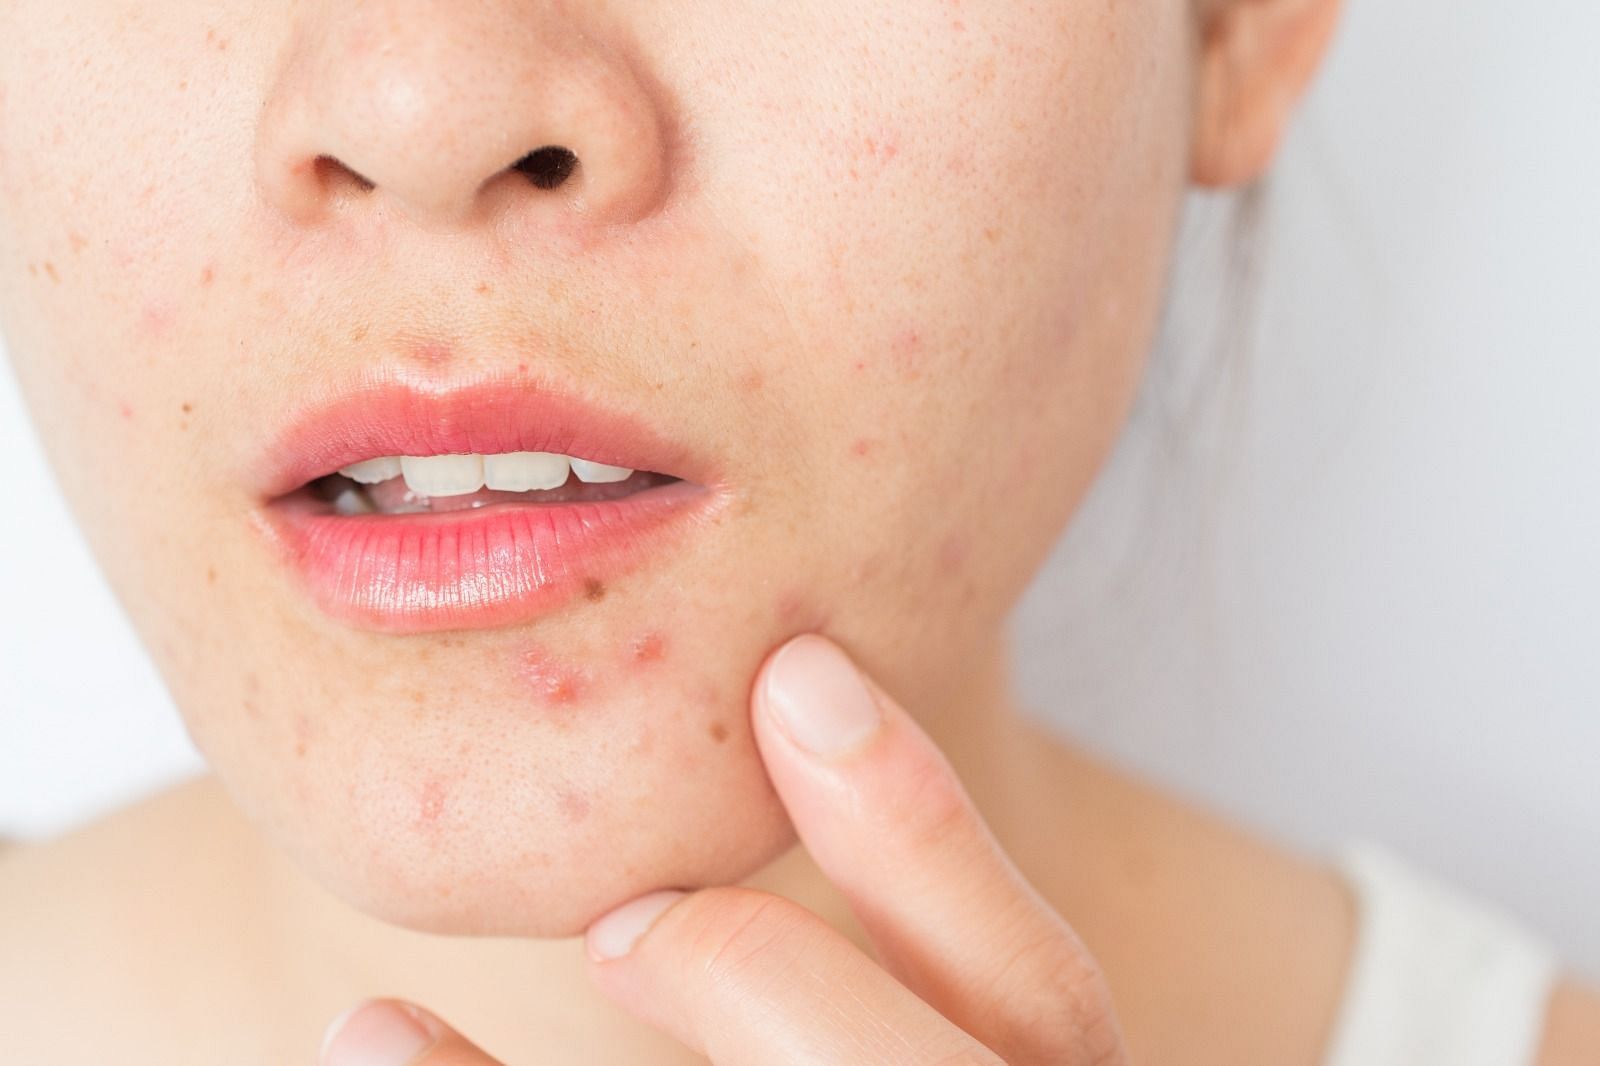 Cold sore and pimple (Image via BOY_ANUPONG/Getty Images)